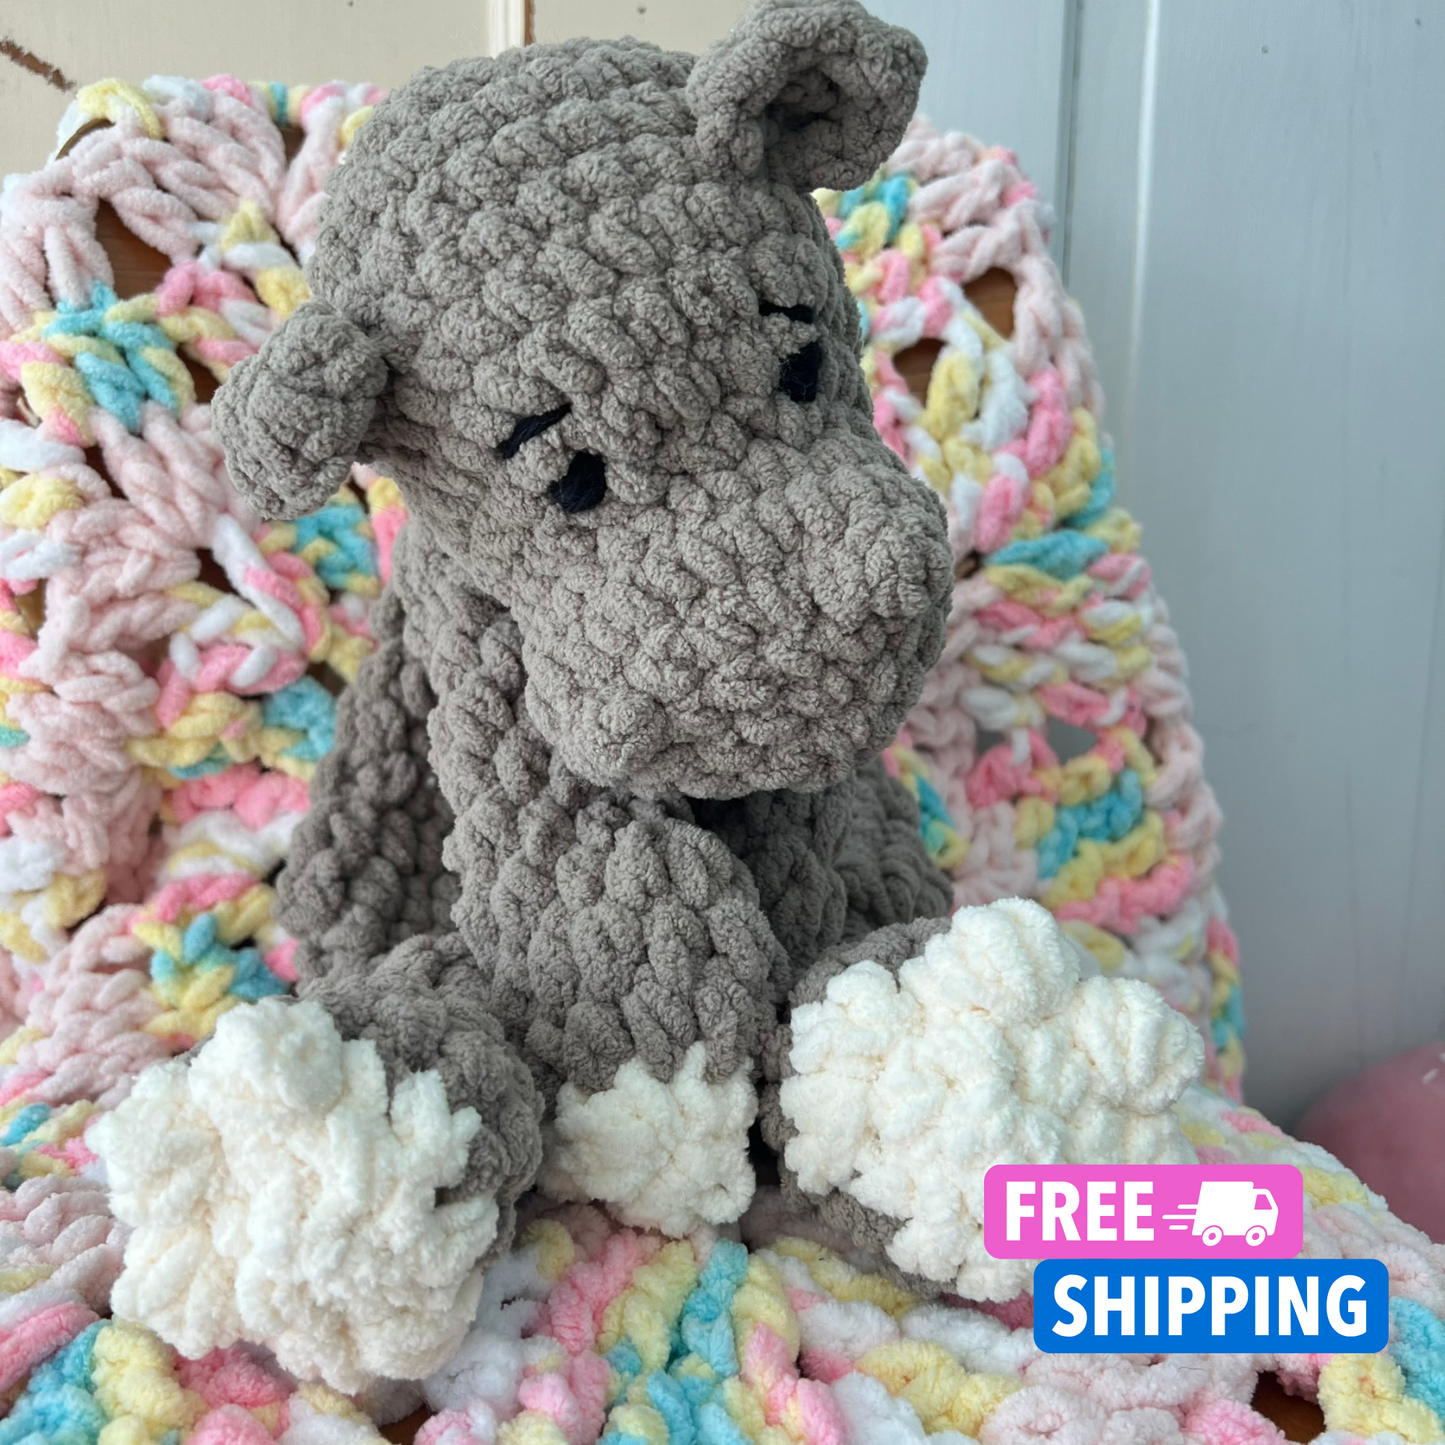 Hippo Lovey Toy Handmade Plush Cuddly. Soft & squishy Hippo plushie. Large Soft Toy. Unique Baby Shower Gift/ READY TO SHIP/Hippo Snuggler